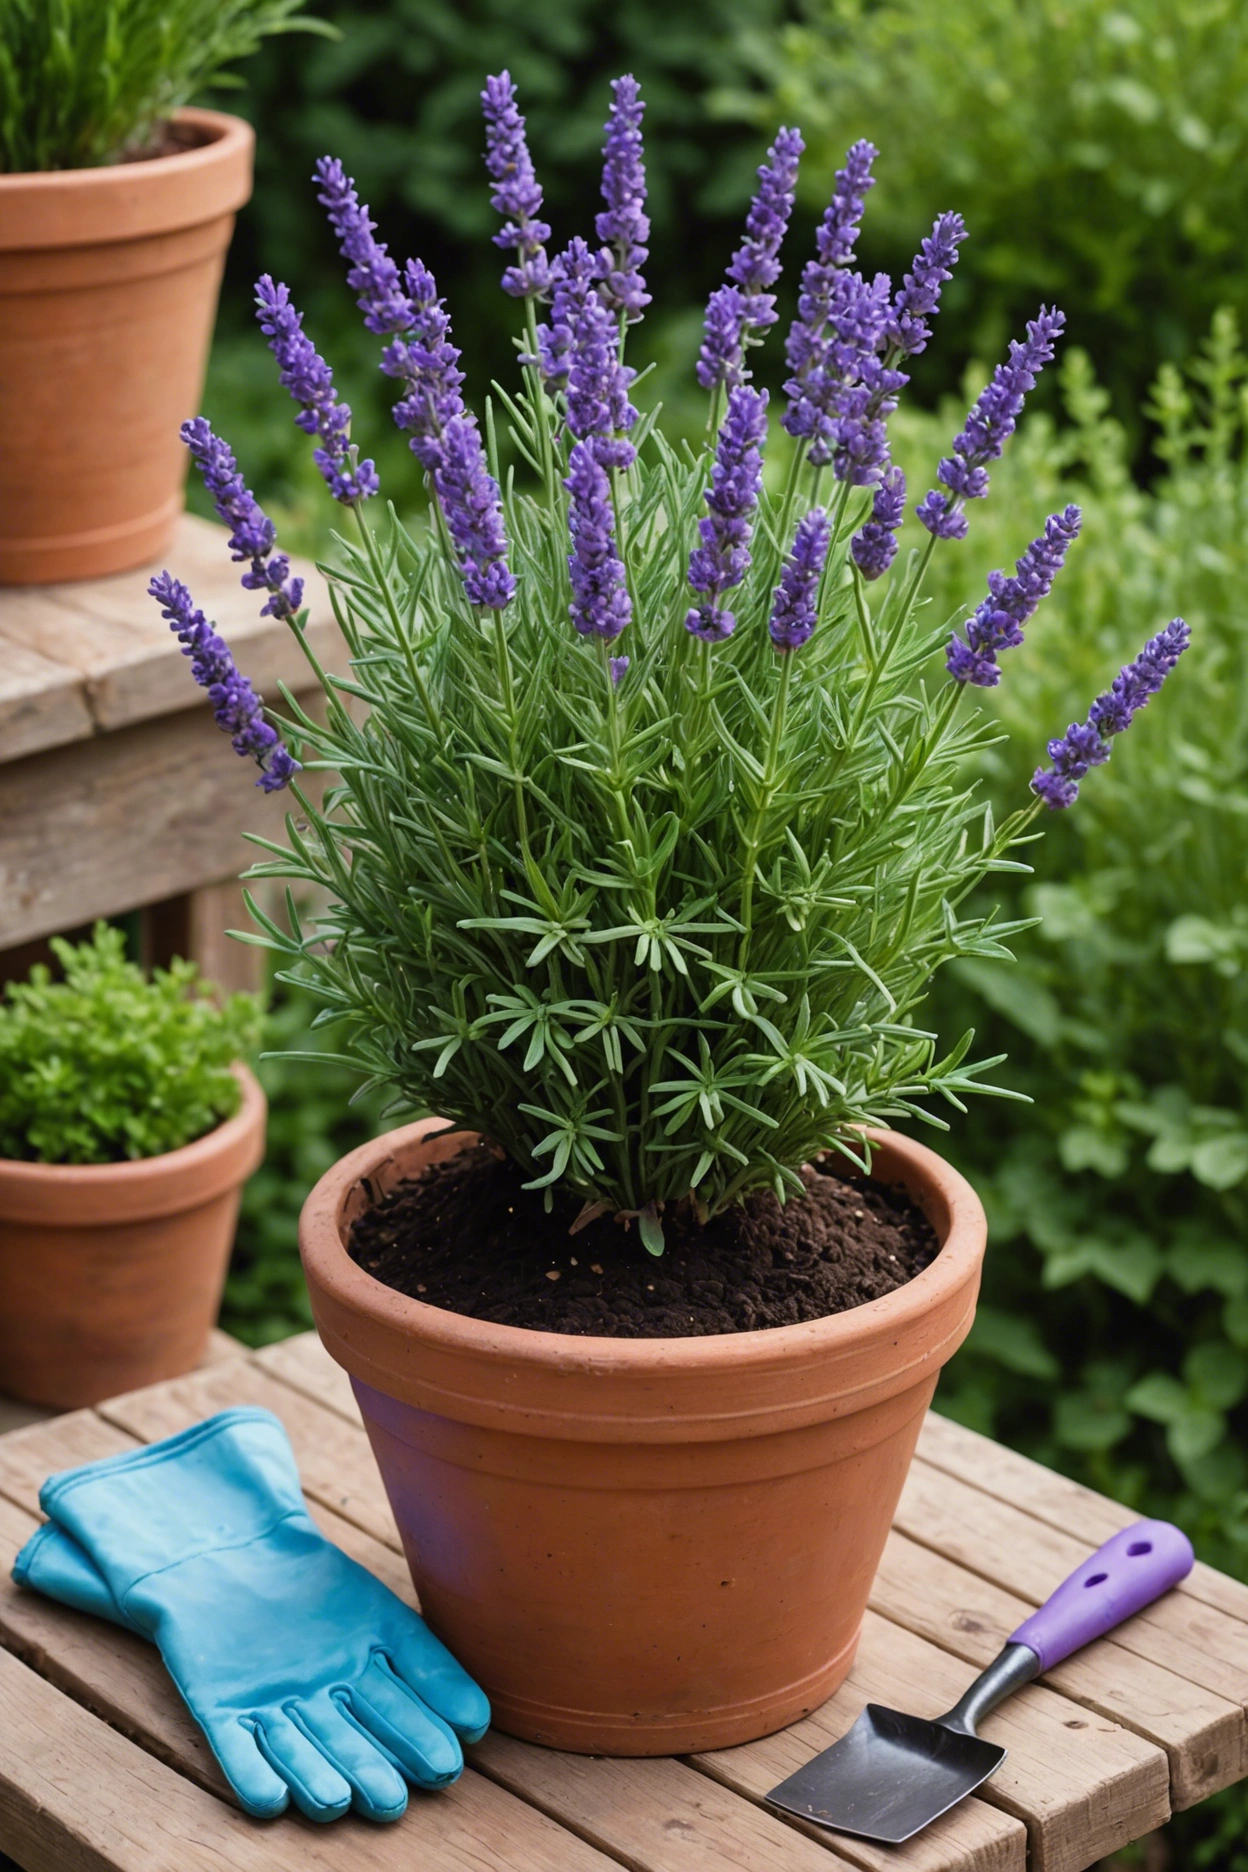 "Lavender Grosso plant in a terracotta pot on a wooden table, with gardening tools and soil mix nearby, set against a garden backdrop."